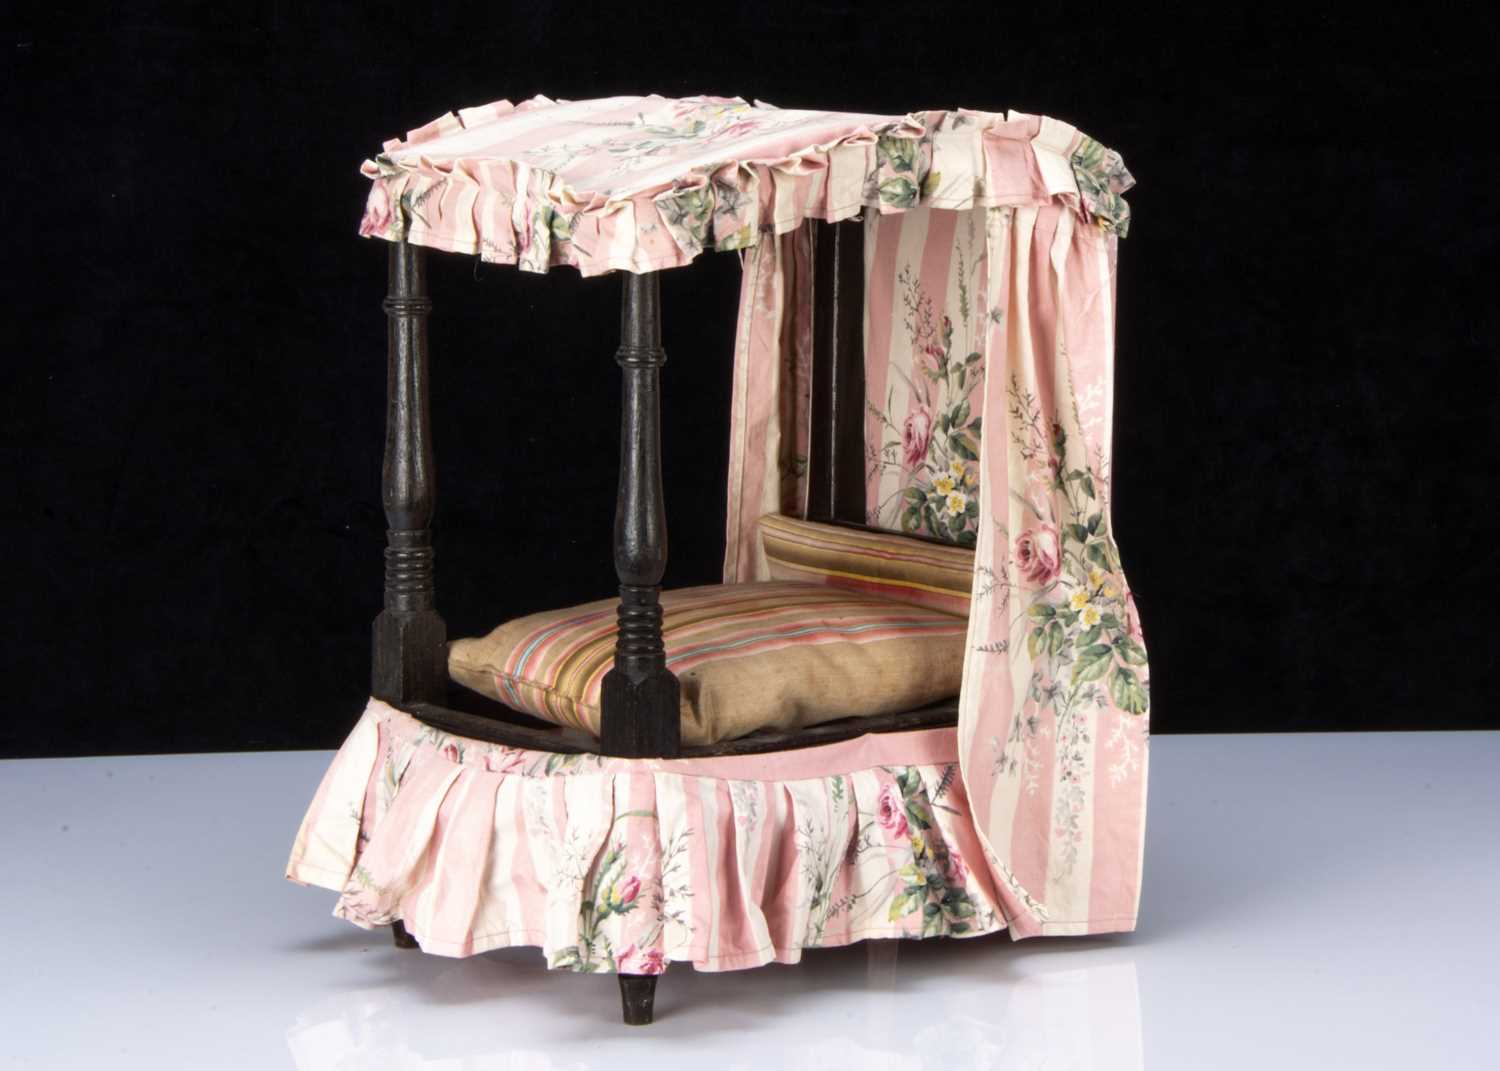 A 19th century English dolls’ tester bed,